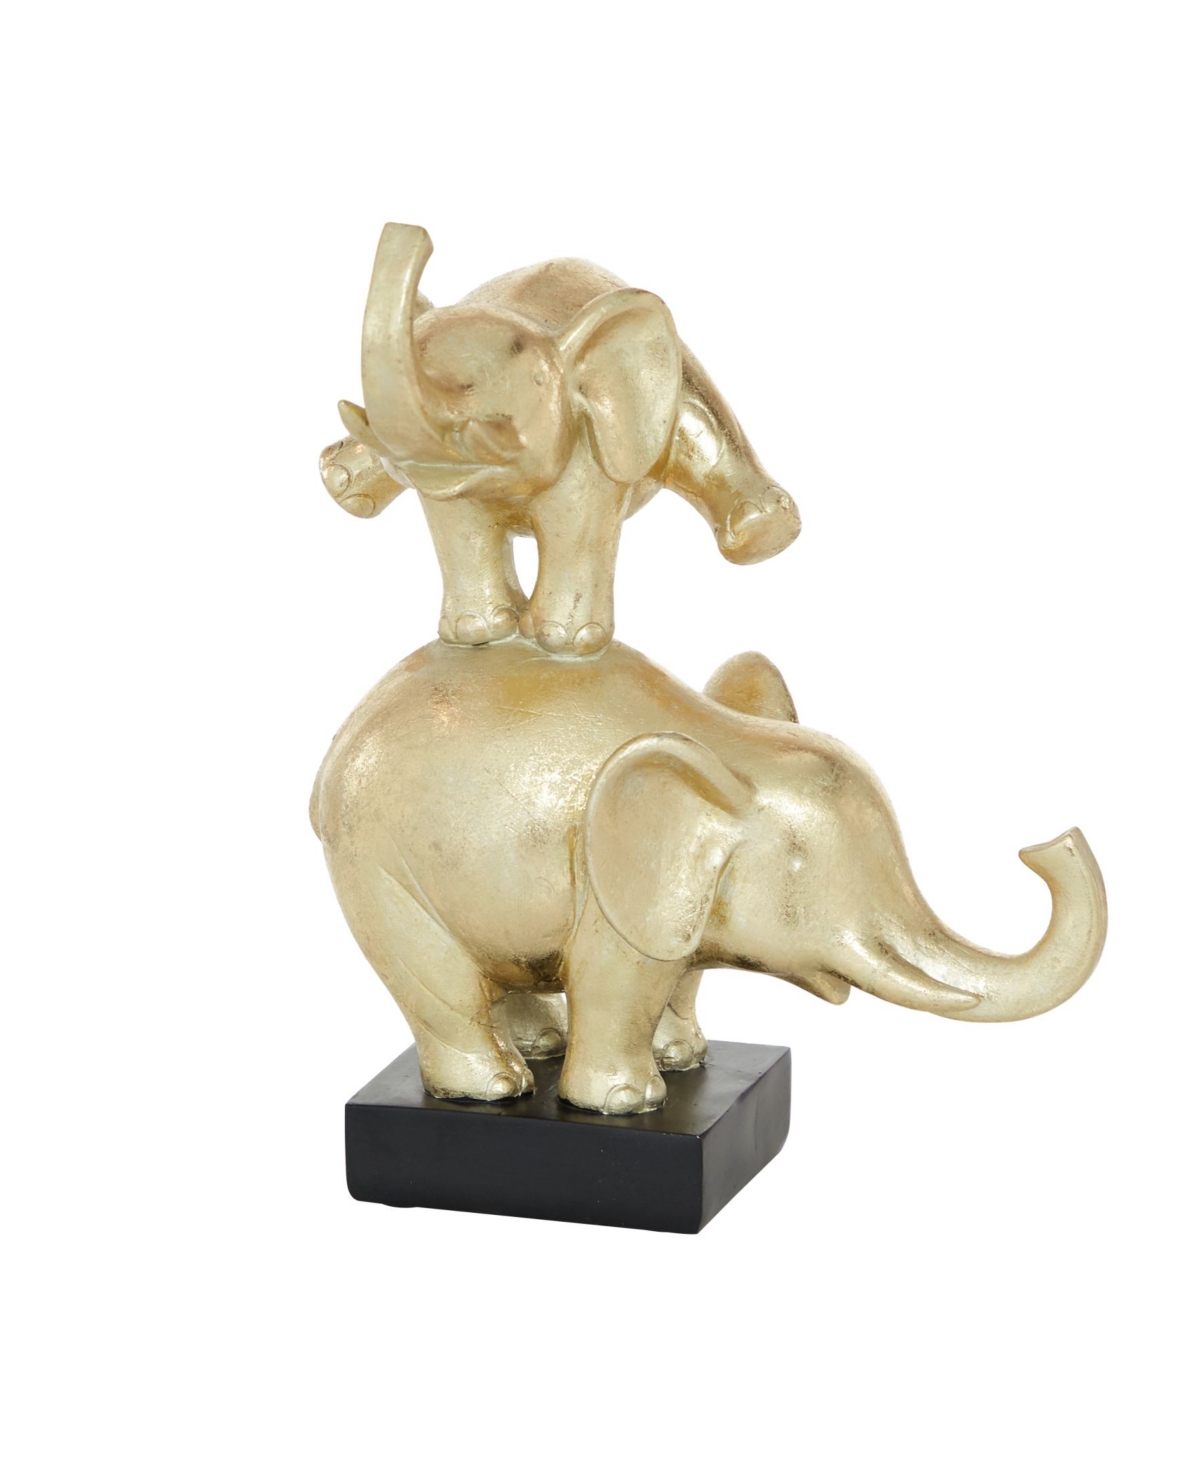 Rosemary Lane Contemporary Elephant Sculpture, 10" X 8" In Gold-tone